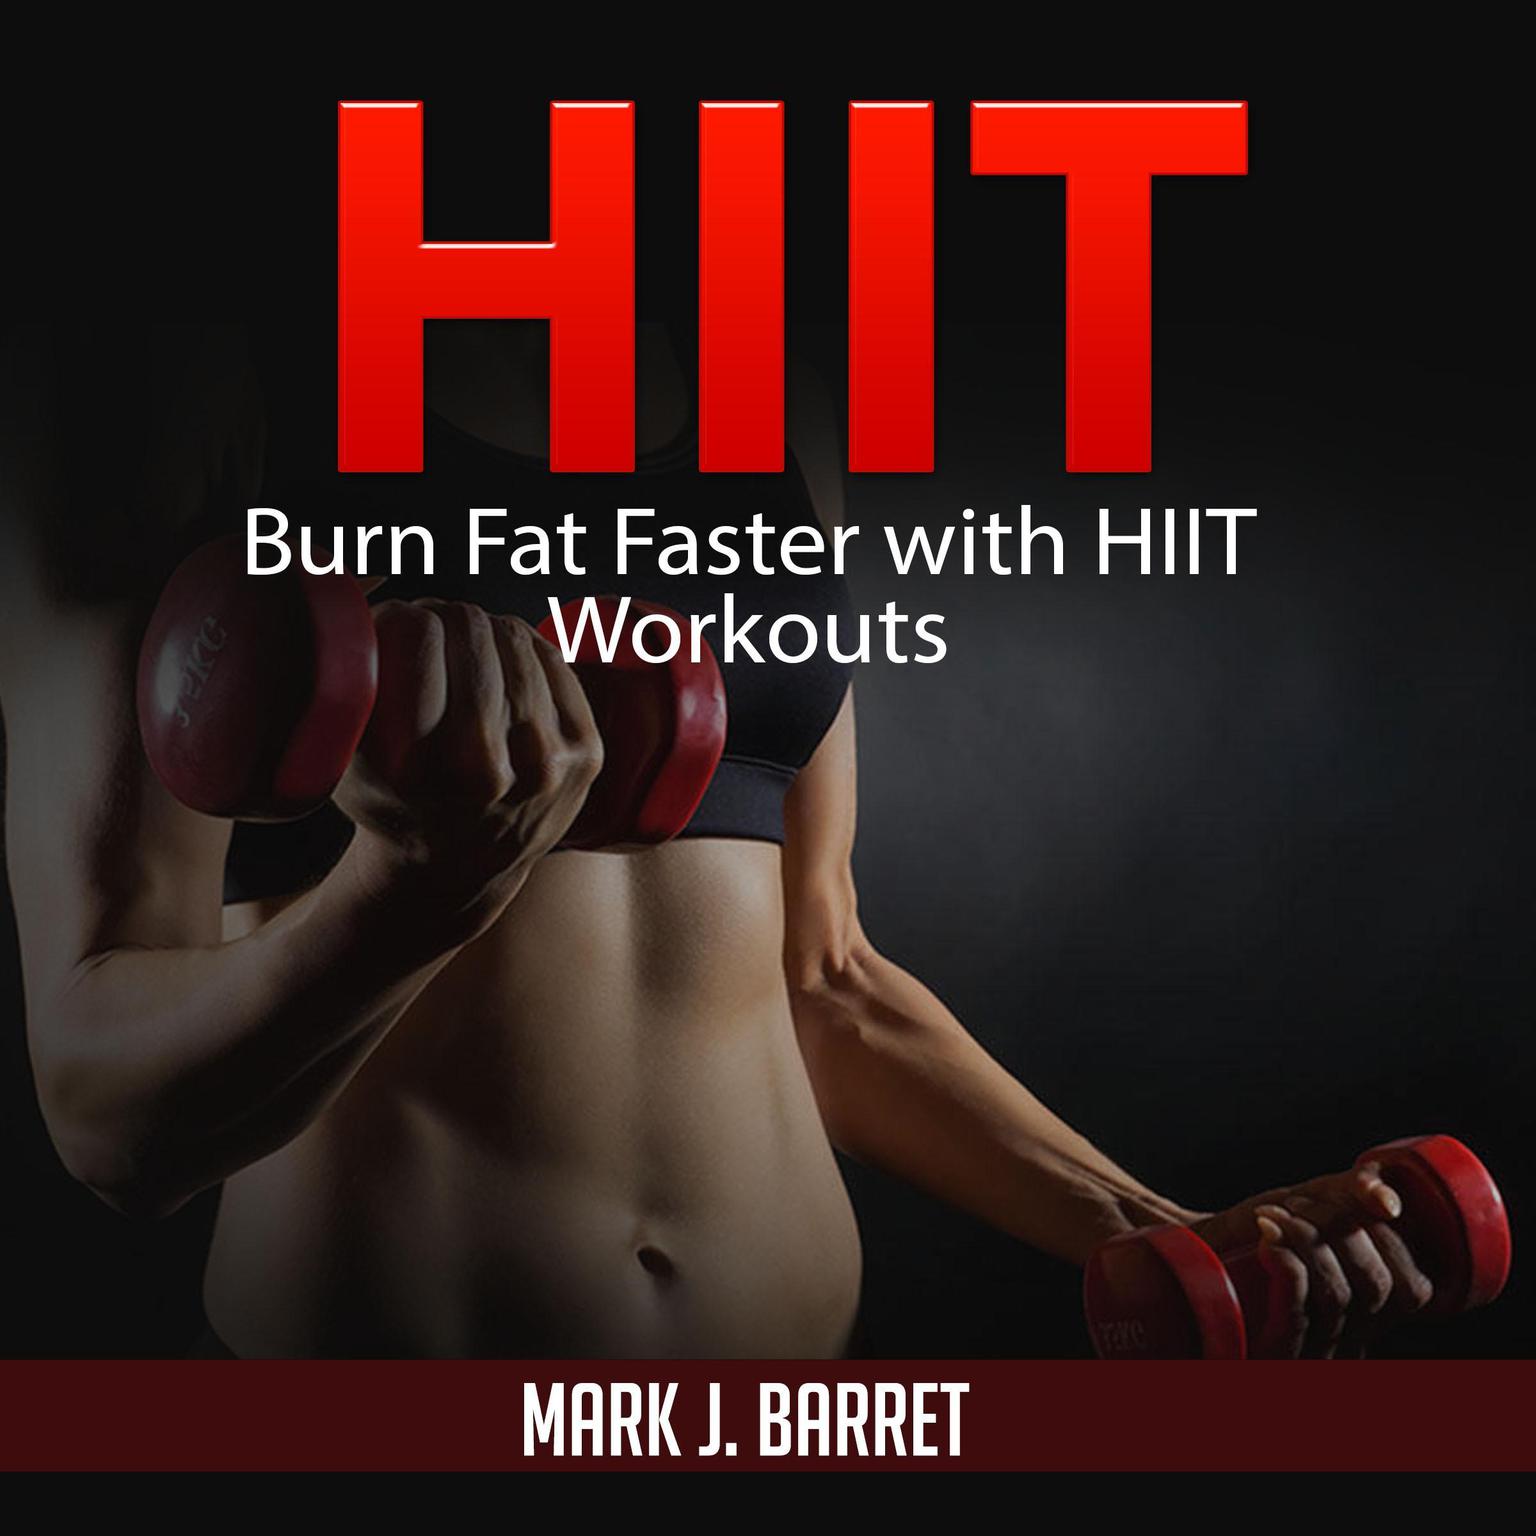 Hiit: Burn Fat Faster with HIIT Workouts Audiobook, by Mark J. Barret